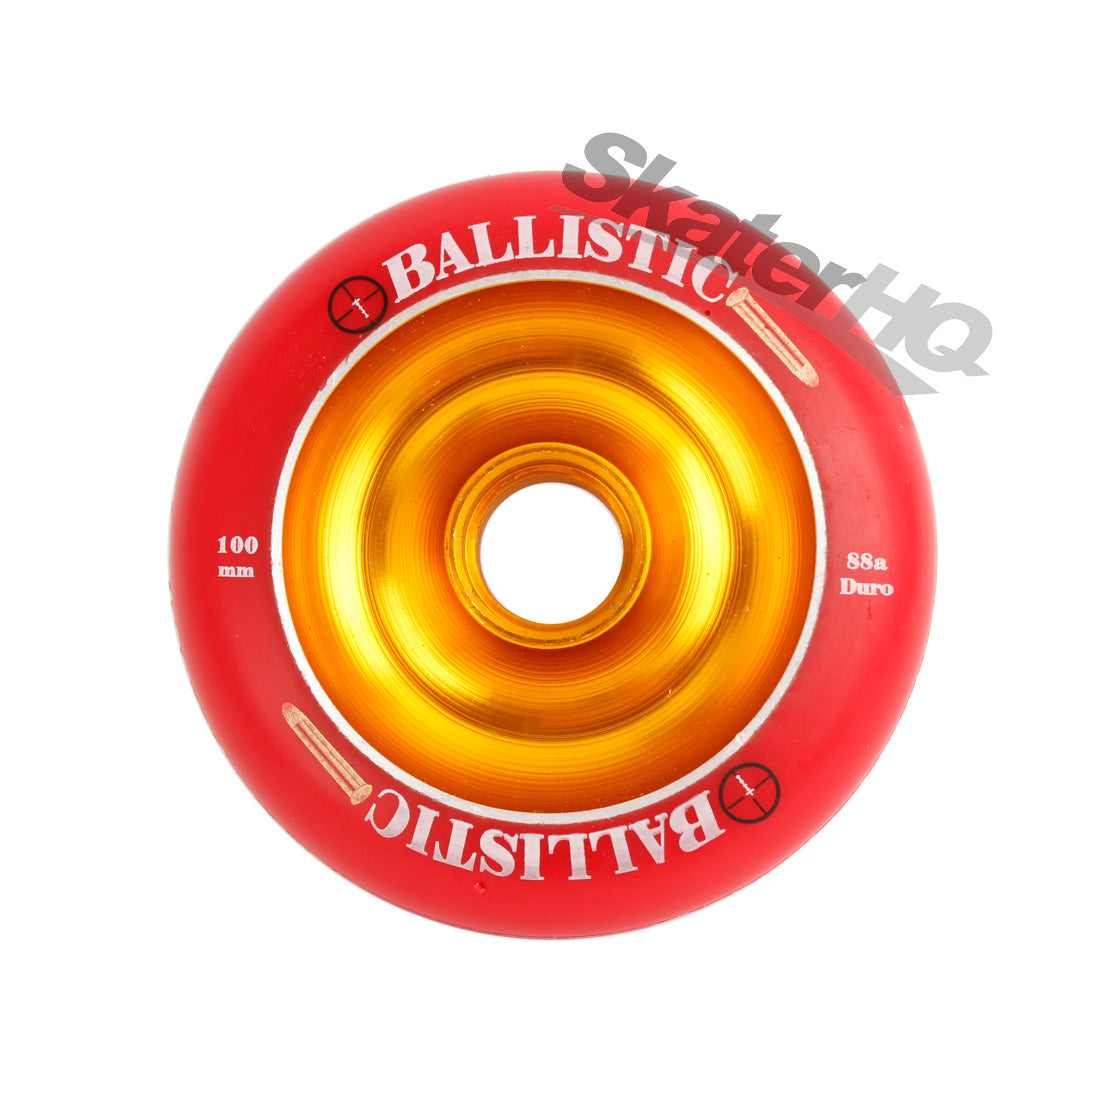 Ballistic Infinity Metal Core 100mm/88a - Red/Gold Scooter Wheels